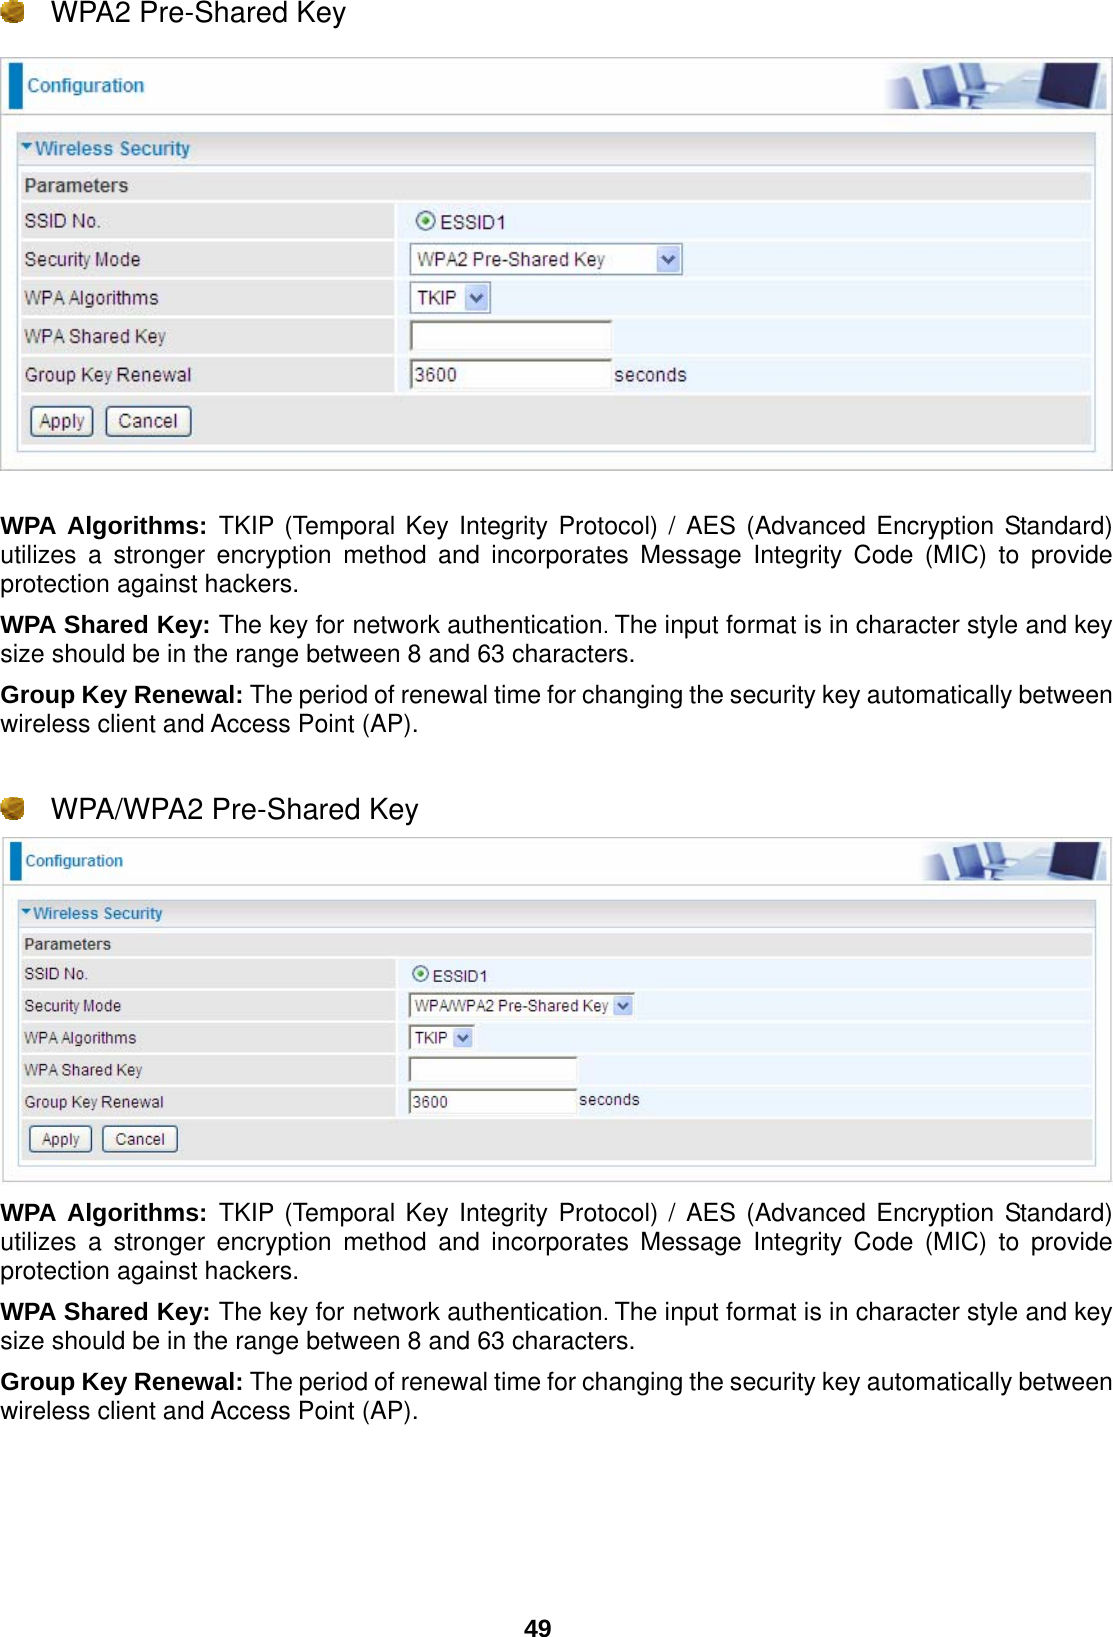  49  WPA2 Pre-Shared Key    WPA Algorithms: TKIP (Temporal Key Integrity Protocol) / AES (Advanced Encryption Standard) utilizes a stronger encryption method and incorporates Message Integrity Code (MIC) to provide protection against hackers. WPA Shared Key: The key for network authentication. The input format is in character style and key size should be in the range between 8 and 63 characters. Group Key Renewal: The period of renewal time for changing the security key automatically between wireless client and Access Point (AP).    WPA/WPA2 Pre-Shared Key  WPA Algorithms: TKIP (Temporal Key Integrity Protocol) / AES (Advanced Encryption Standard) utilizes a stronger encryption method and incorporates Message Integrity Code (MIC) to provide protection against hackers. WPA Shared Key: The key for network authentication. The input format is in character style and key size should be in the range between 8 and 63 characters. Group Key Renewal: The period of renewal time for changing the security key automatically between wireless client and Access Point (AP).    